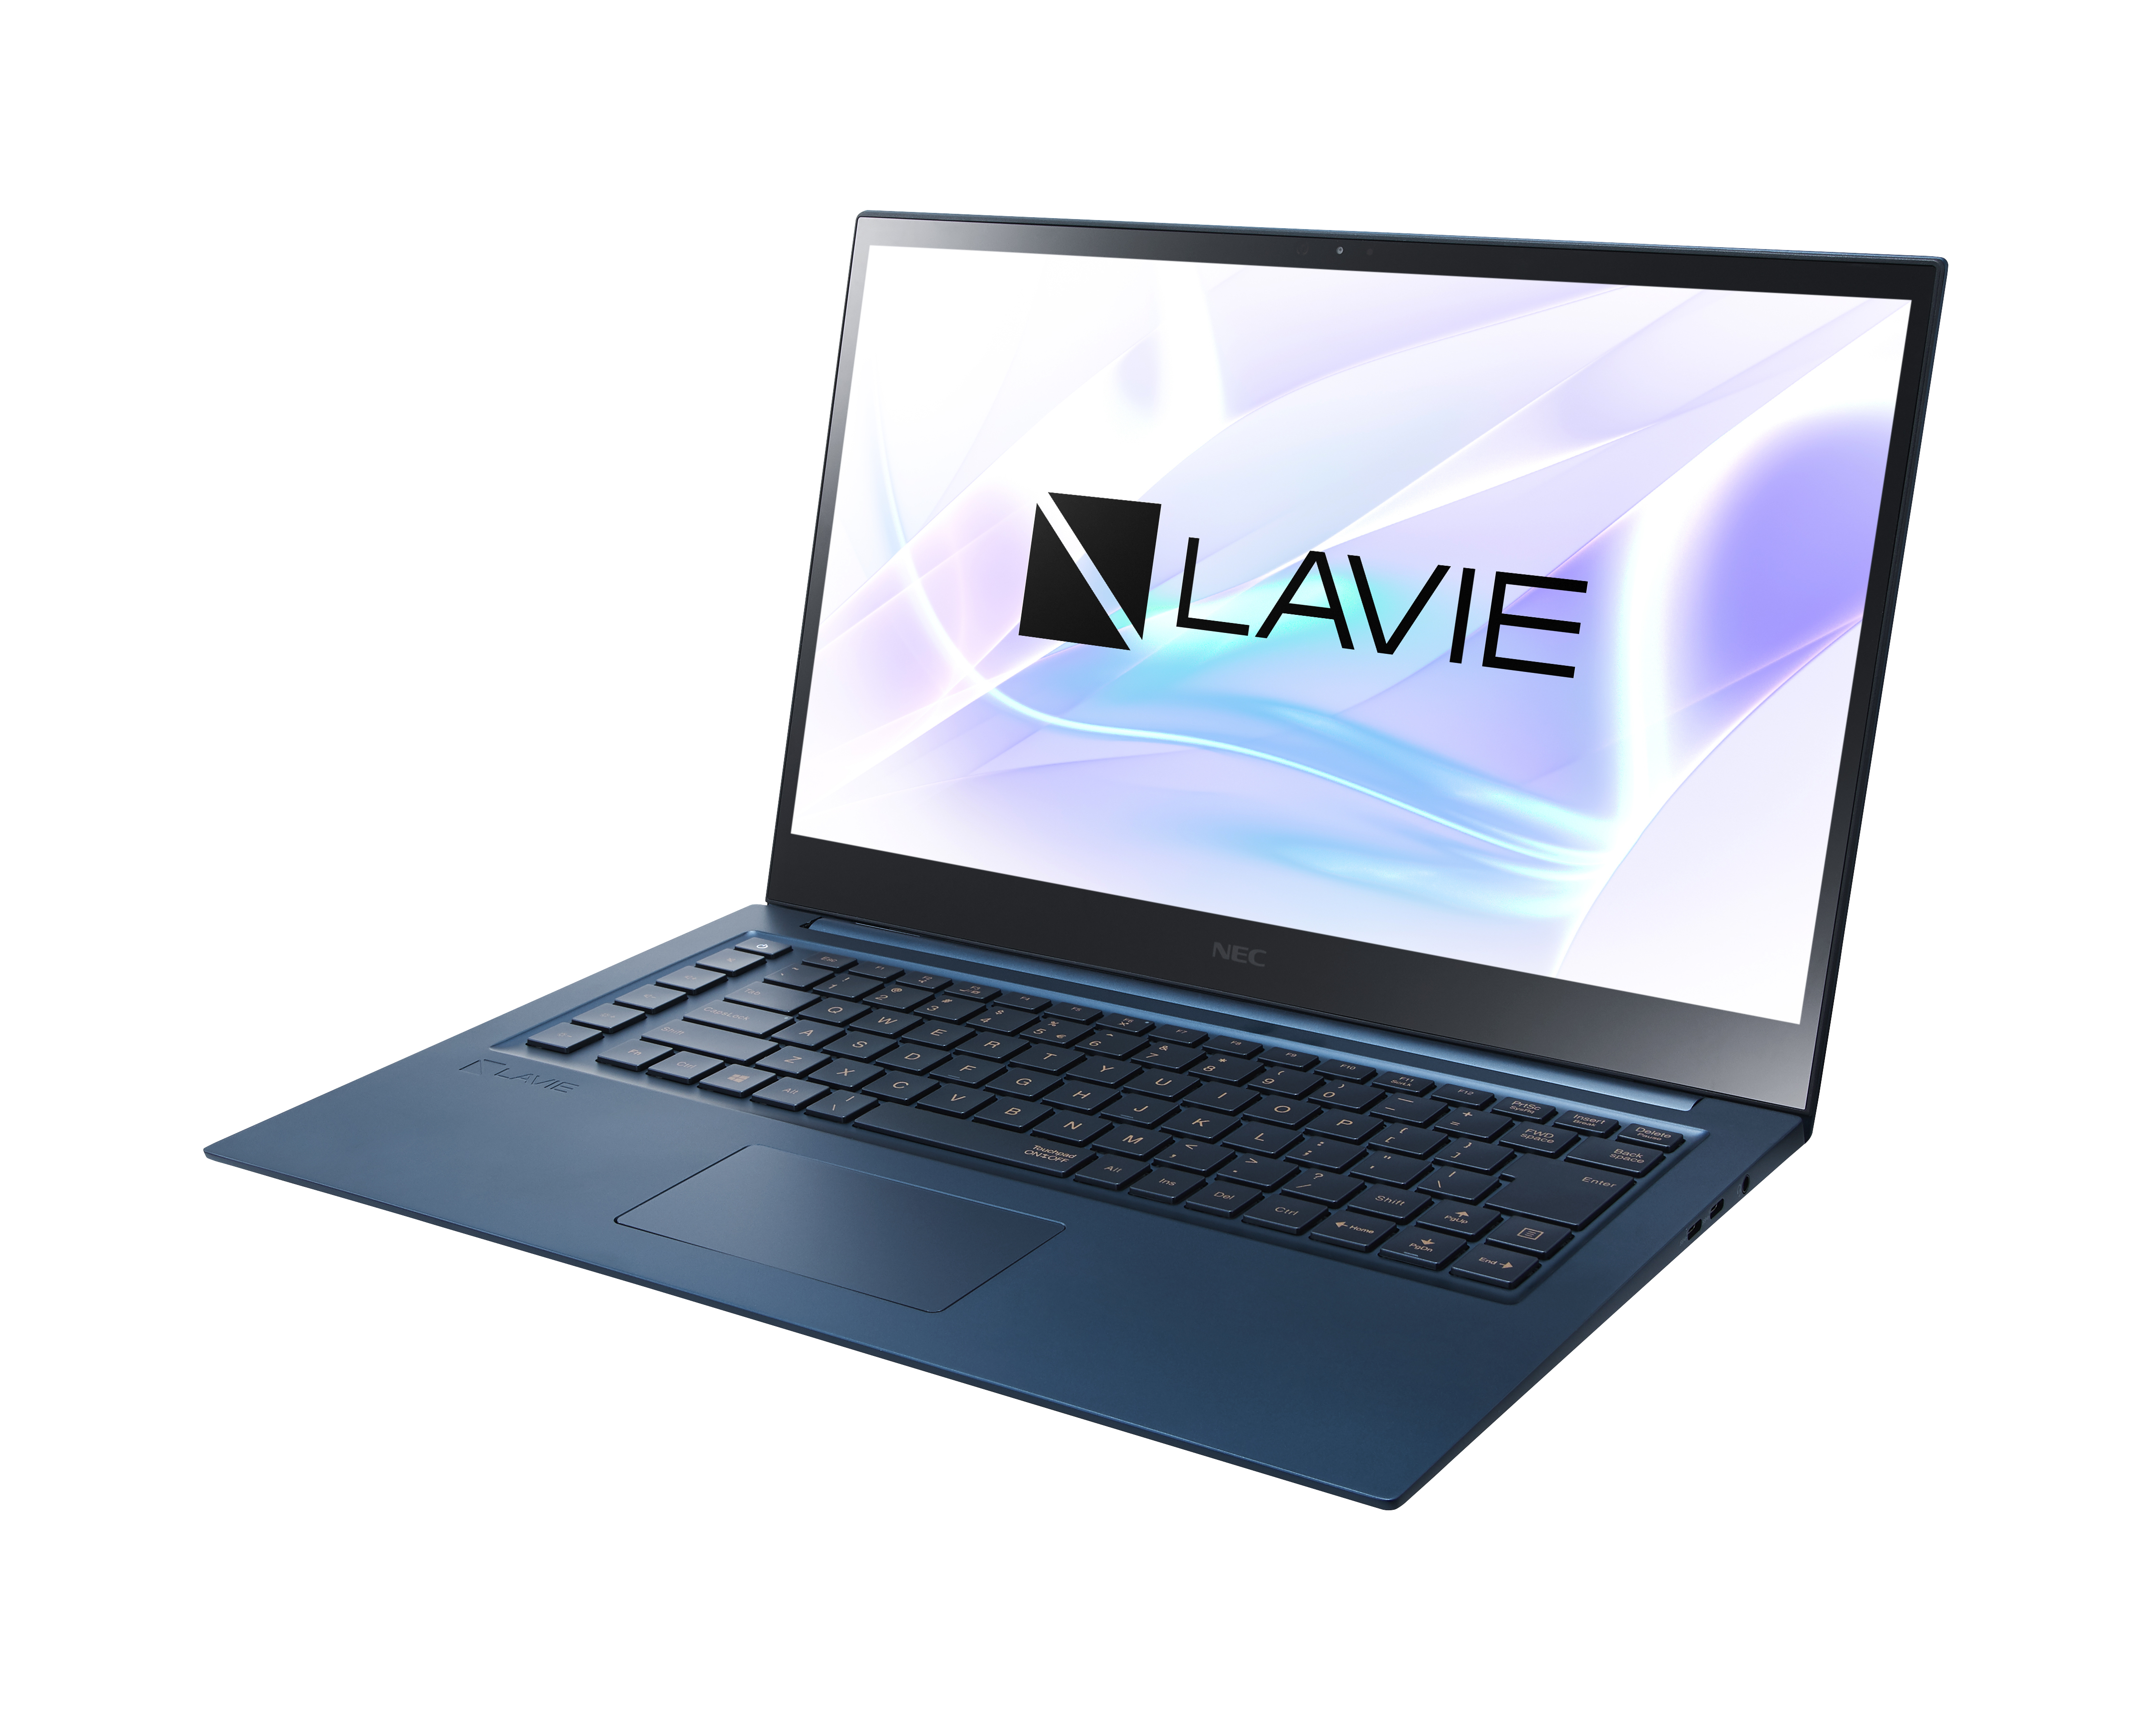 PC/タブレット タブレット The NEC Lavie Vega is a thin-and-light 4K laptop aimed at business 